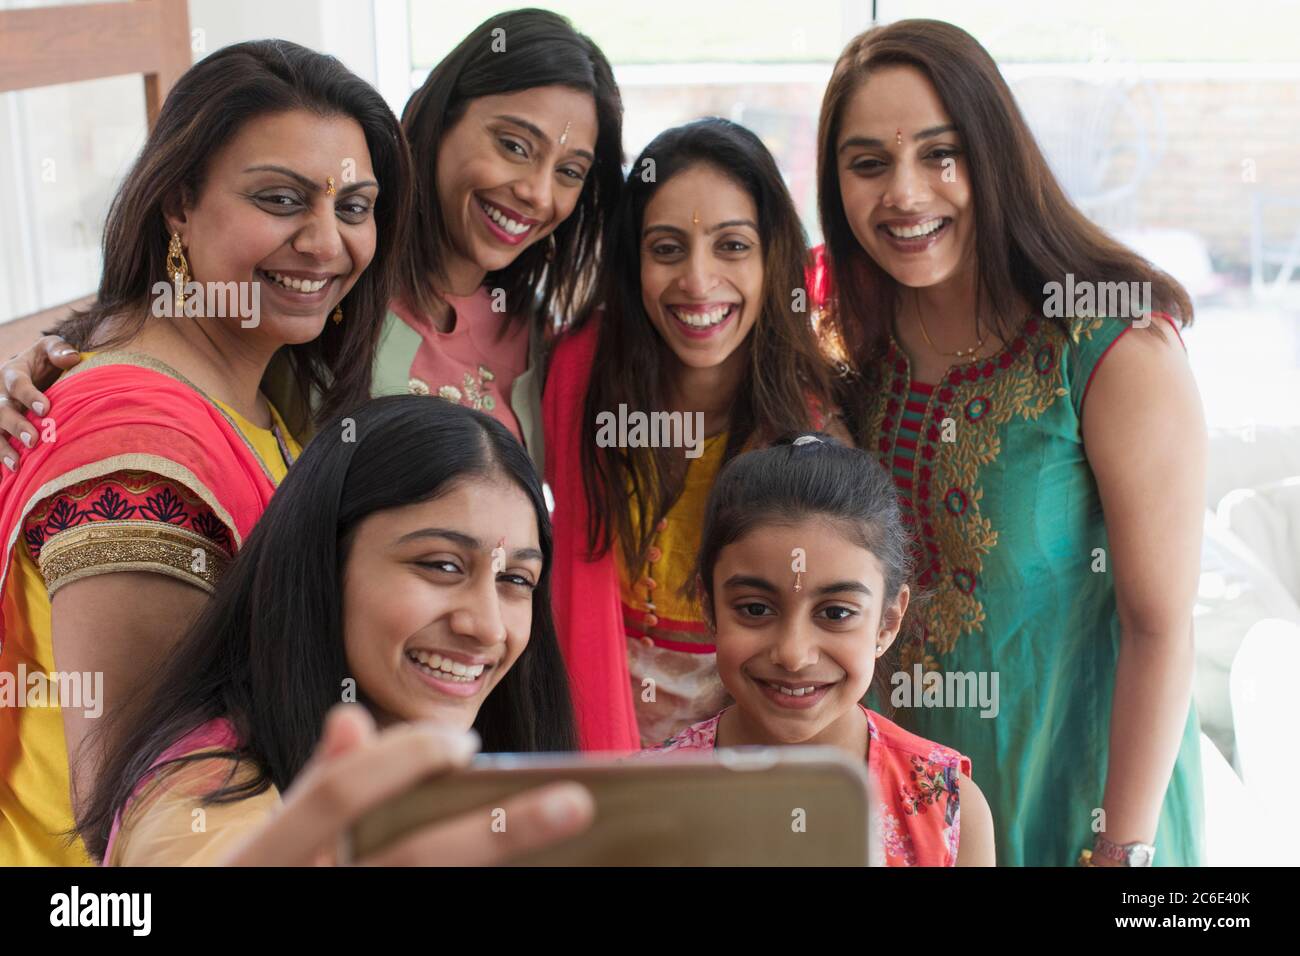 Happy Indian women and girls in saris taking selfie with smart phone Stock Photo